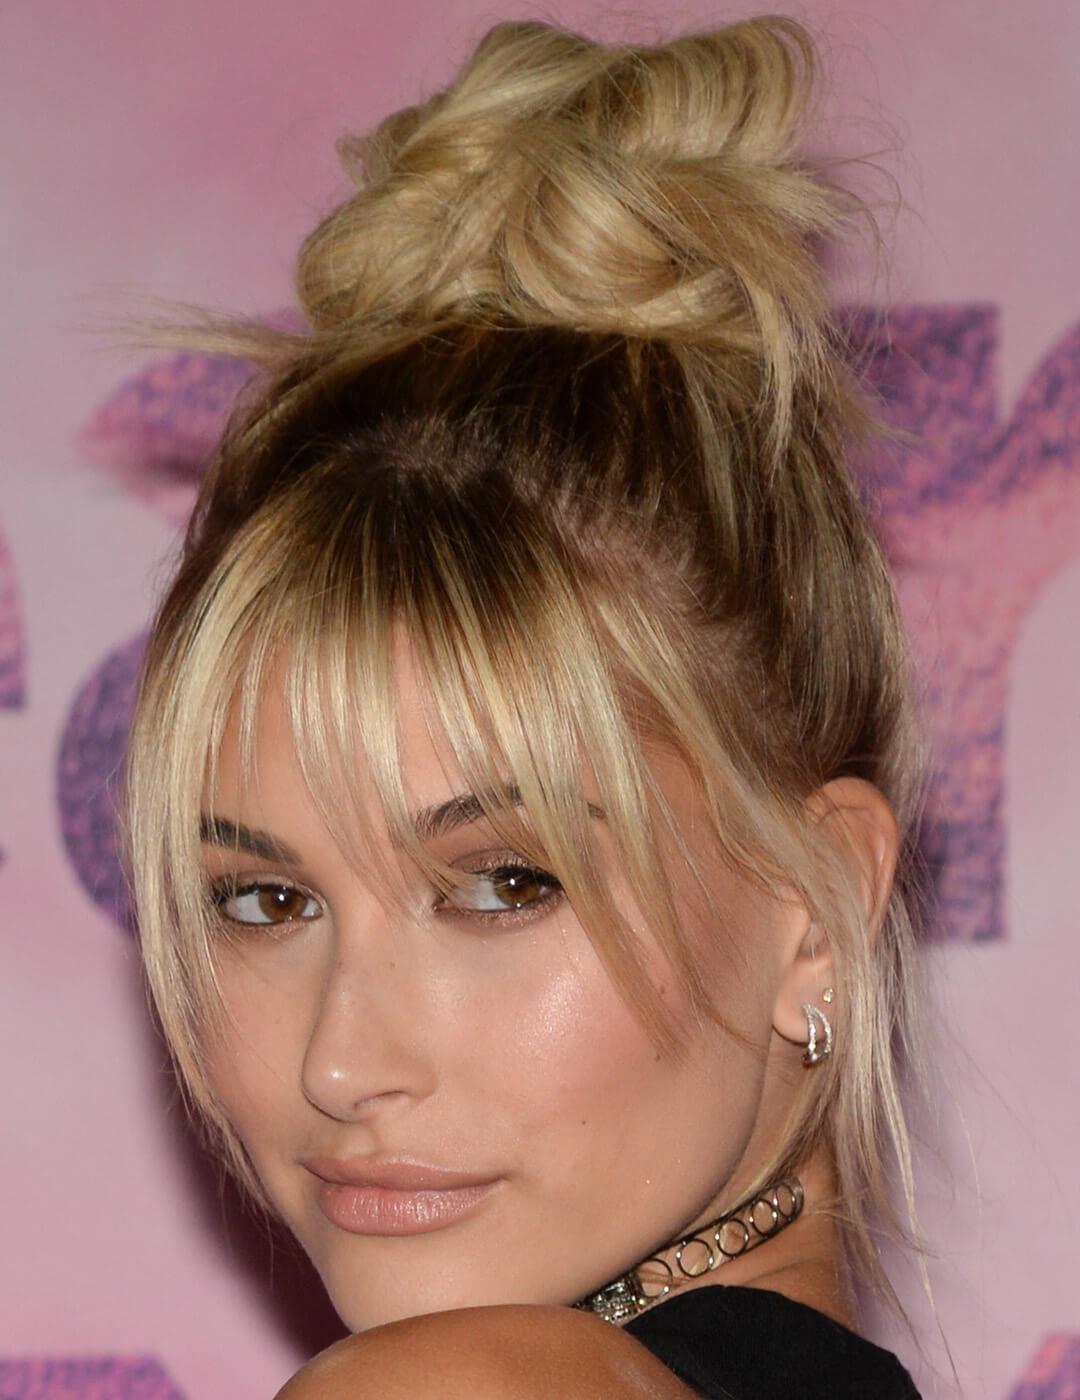 A photo of Hailey Bieber wearing a chic black top elegantly baring her shoulders adorns a necklace that resembles a stylish bangle